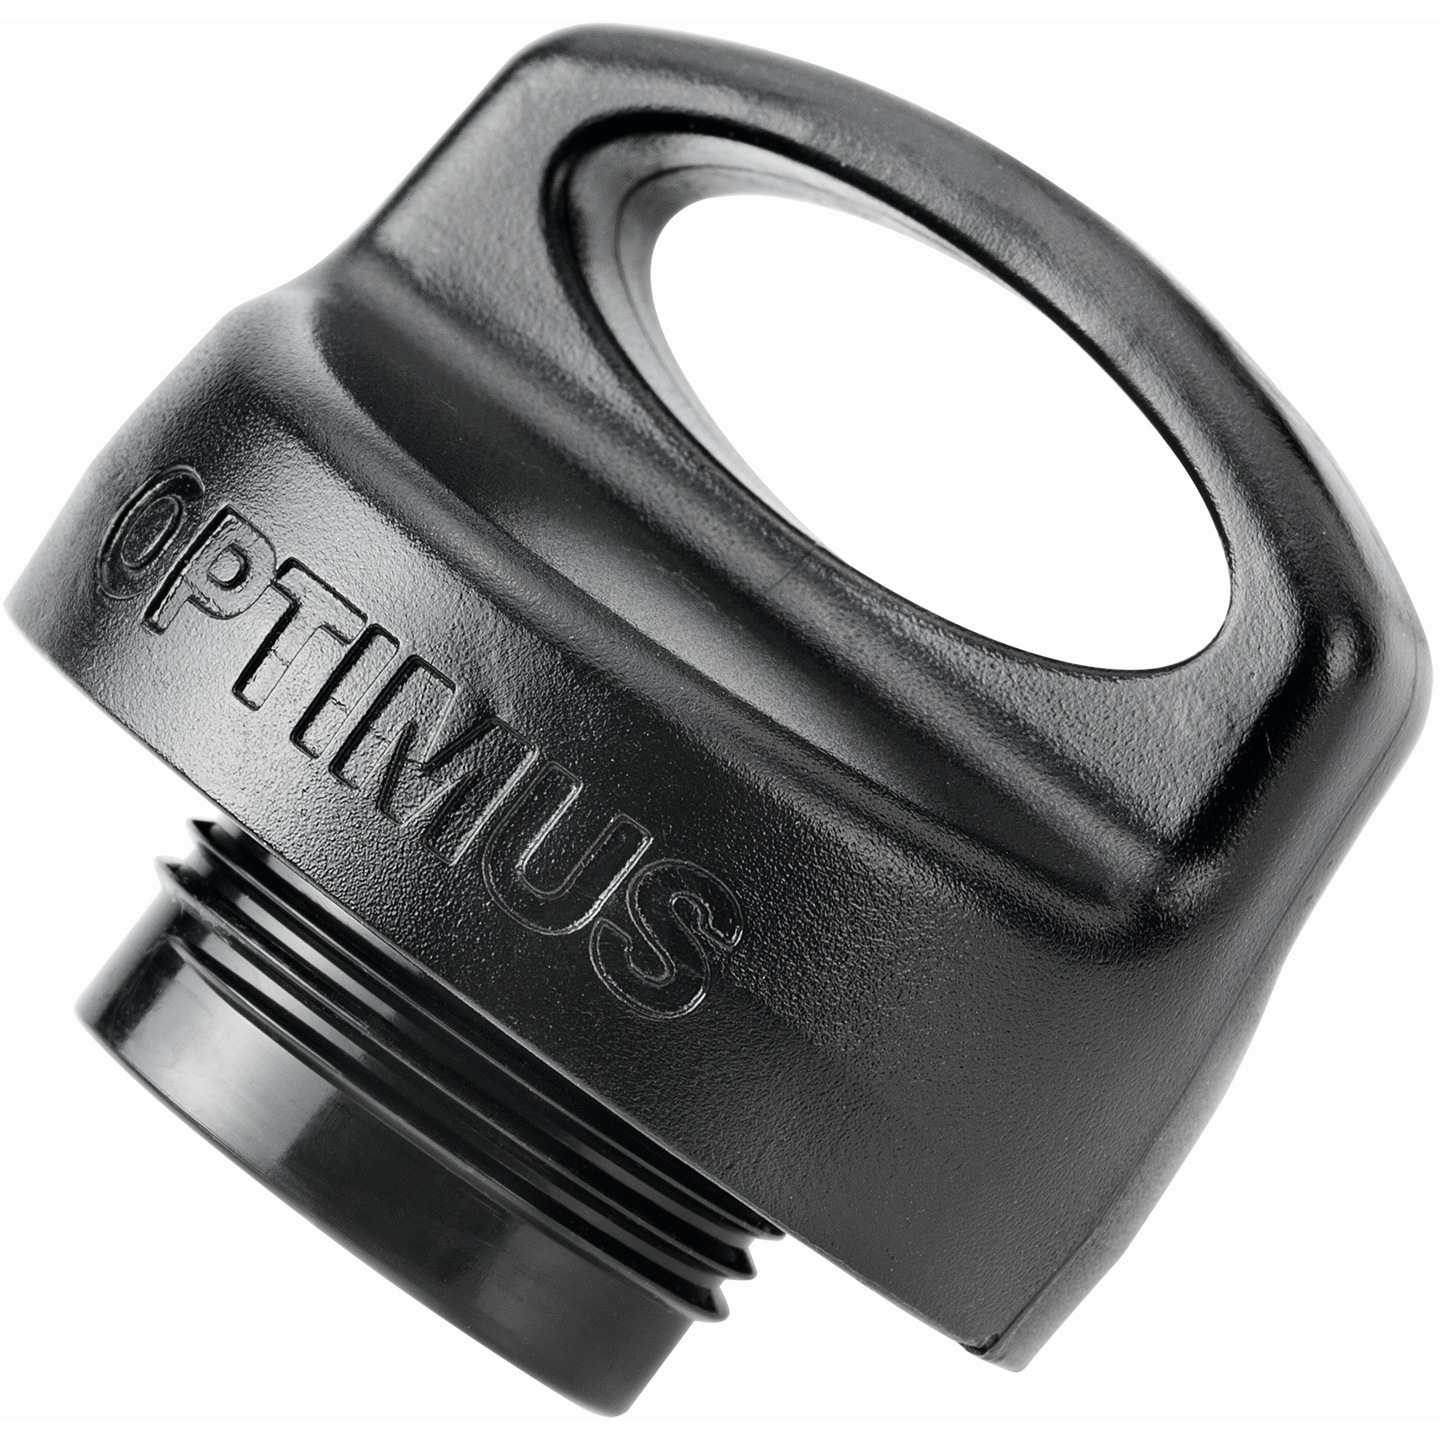 Picture of Optimus Fuel Bottle Cap with Child Safety Lock